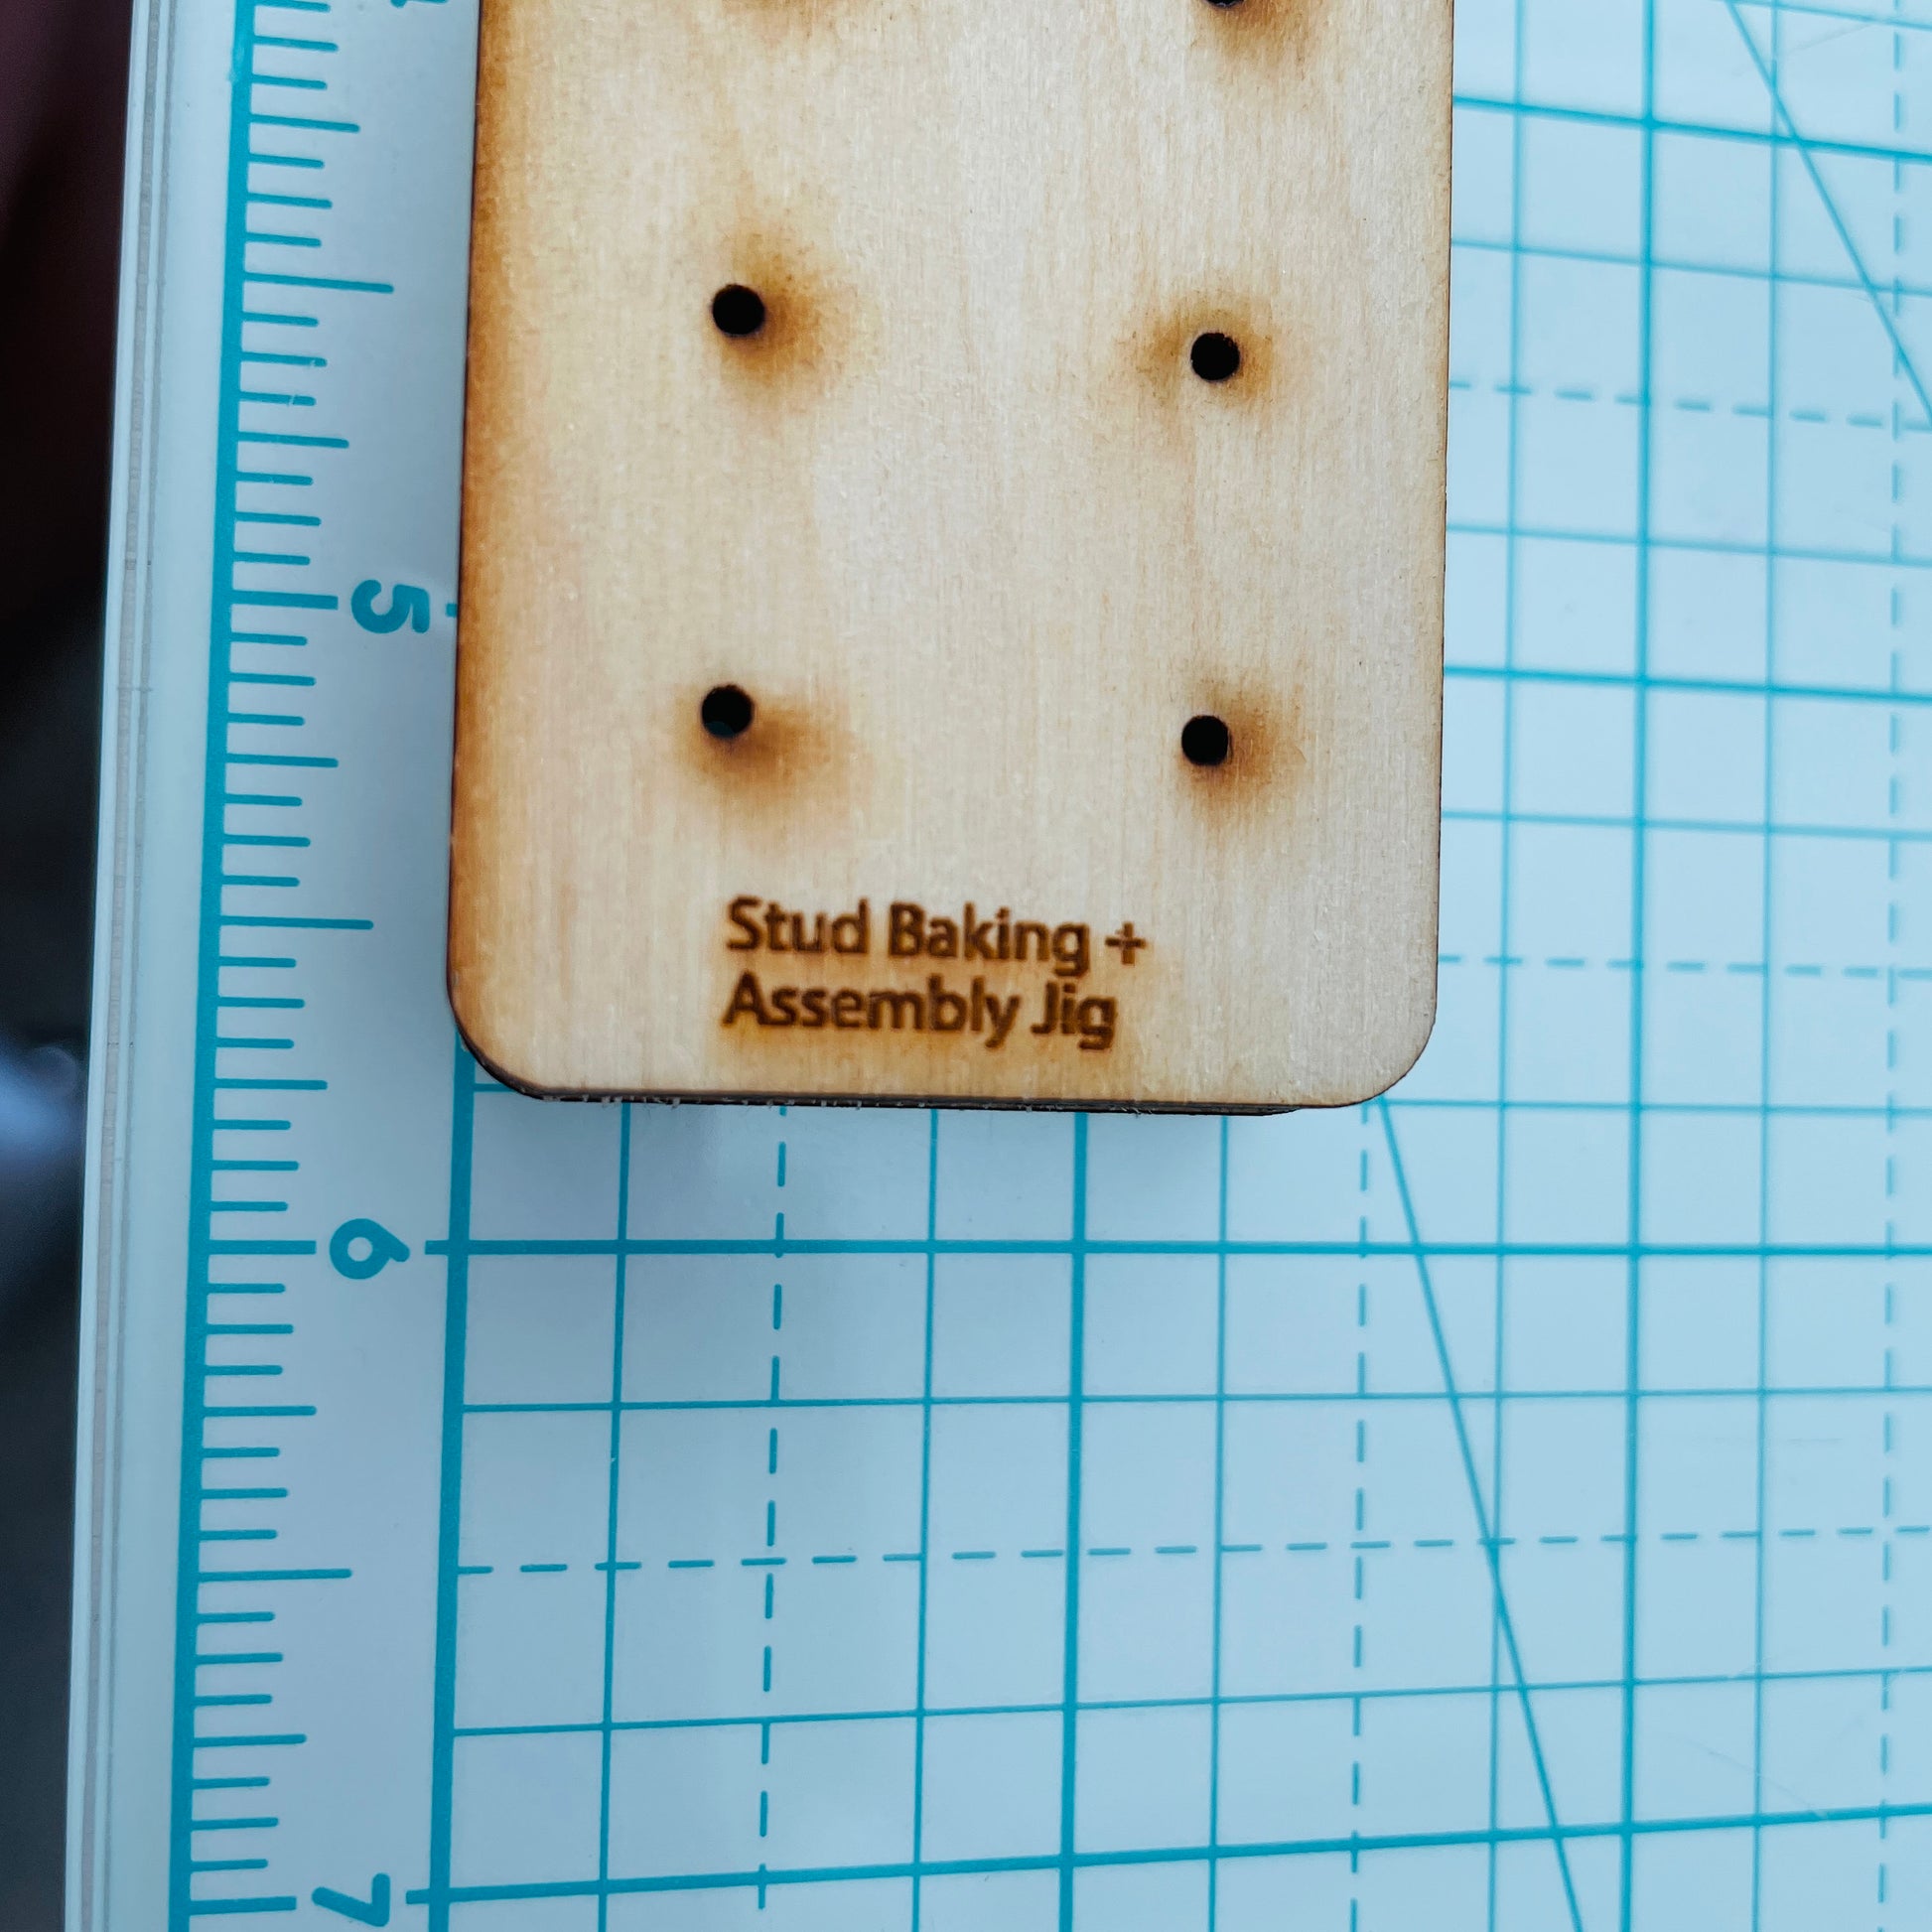 Stud earring assembly and baking jig tool support wood bake polymer clay tool